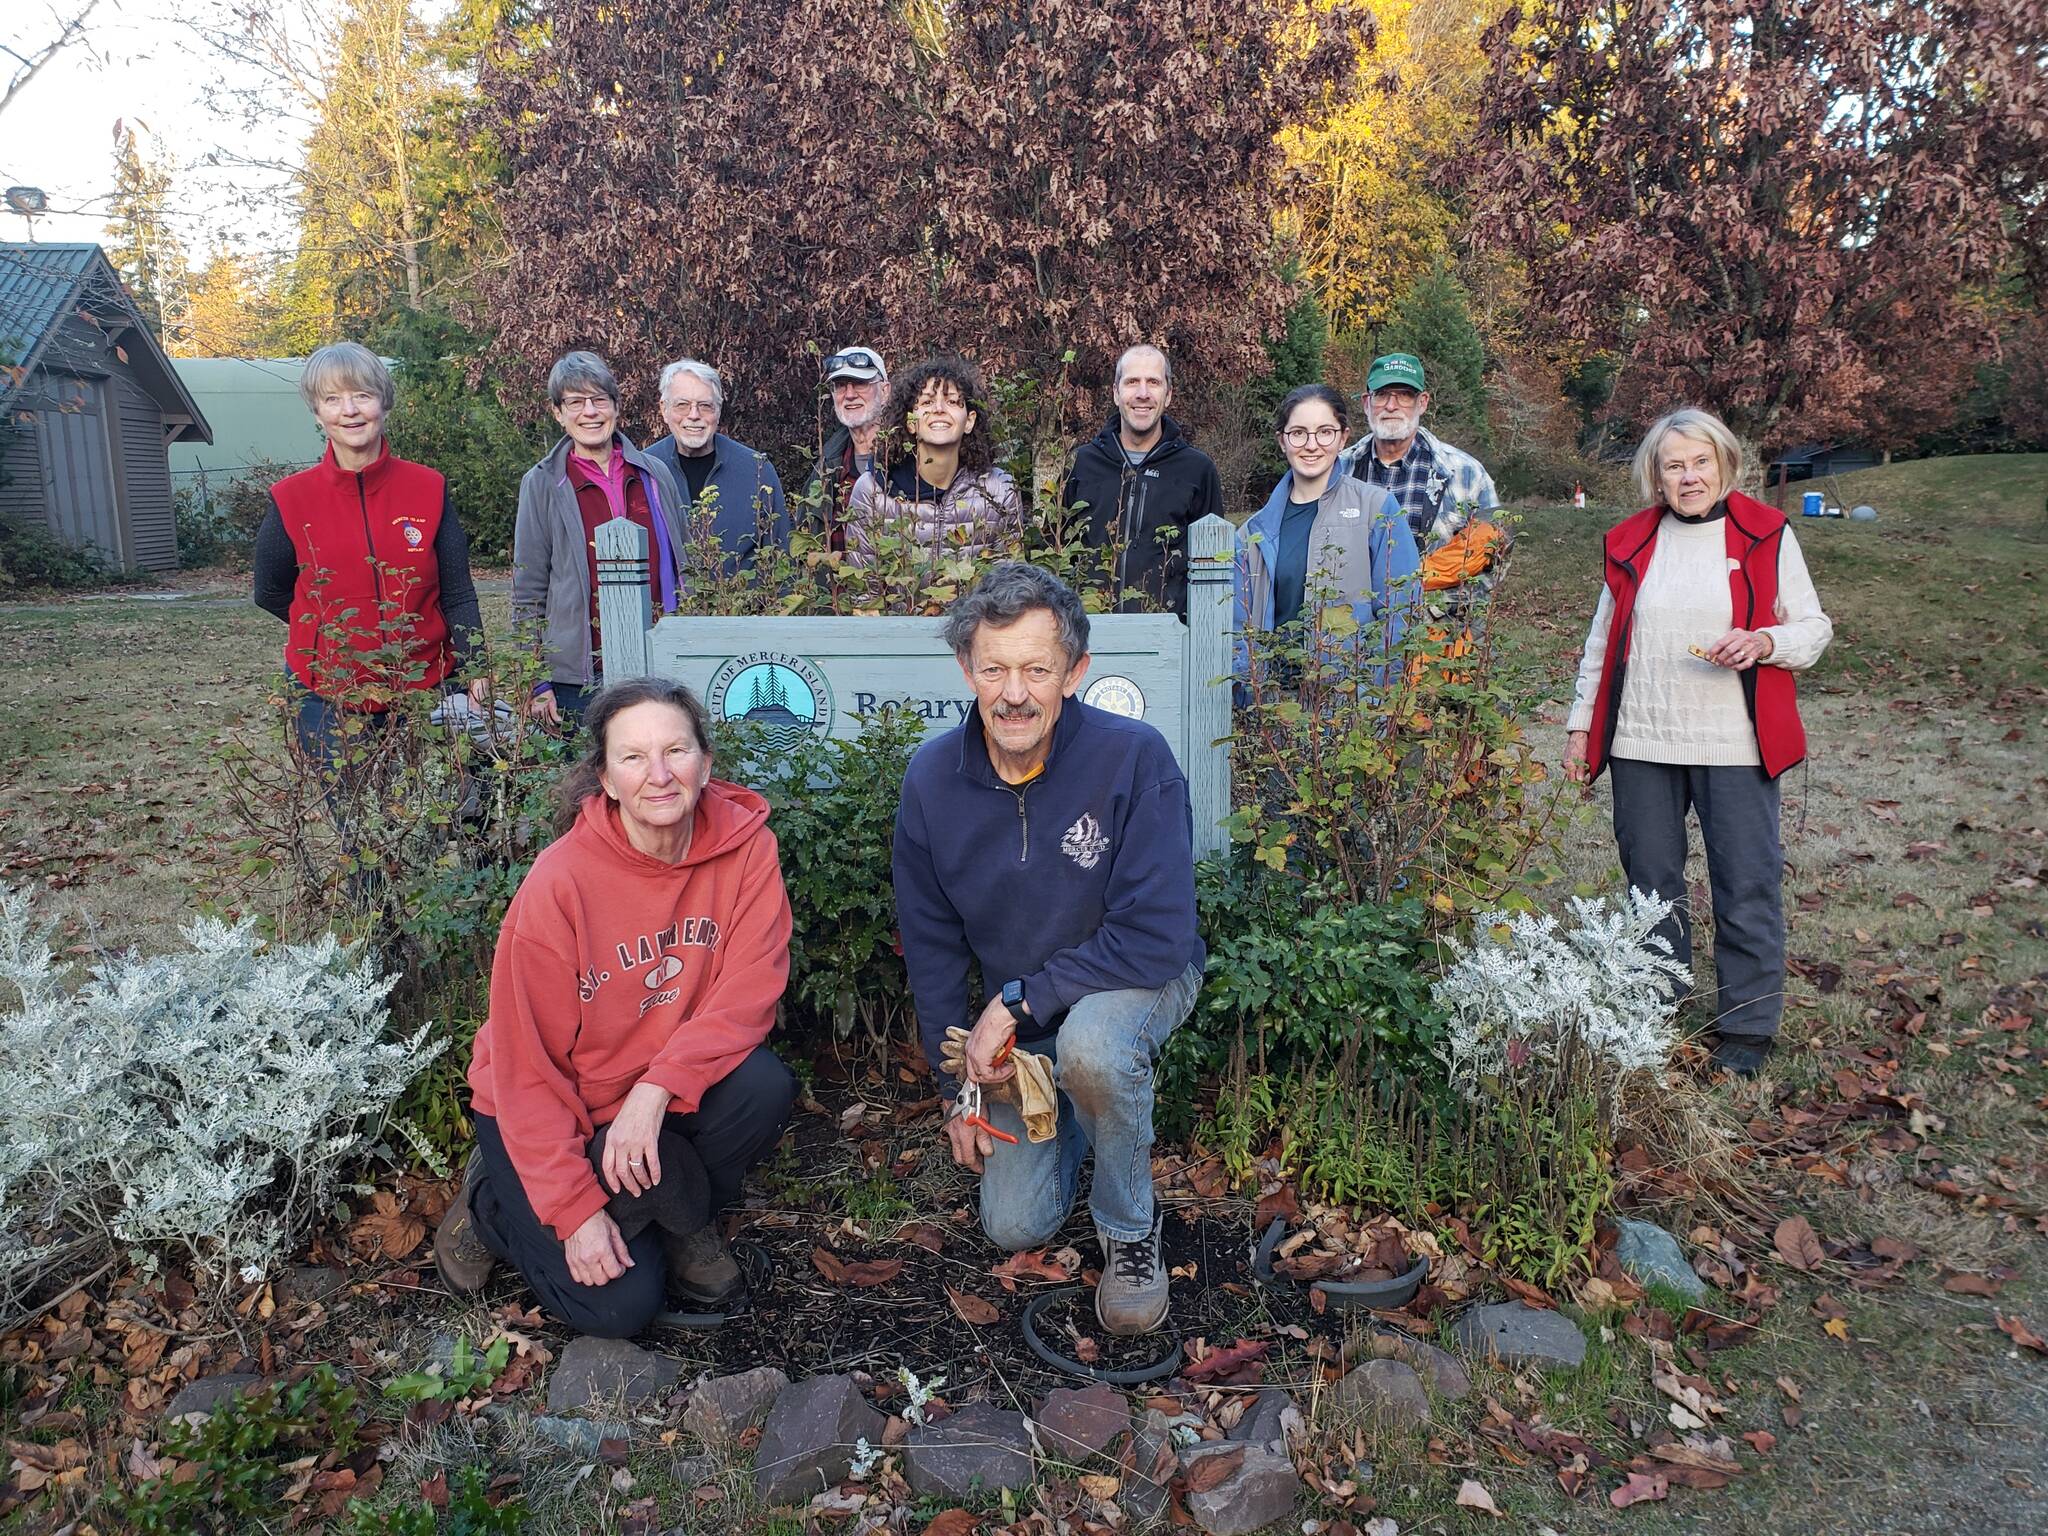 About 10 Rotary Club of Mercer Island members pulled ivy and blackberries during a two-hour cleanup gathering at Rotary Park on Nov. 19. The city parks staff provided gloves, tools, water and snacks for the volunteers. Pictured are: back row, from left, Pat Turner, Edie Warner, Mike Finn, John Hamer, Jordan Fischer (city staff), Rick Newell, Sally Dorer (Mercer Island High School student), John Howe and Vyvienne Stumbles; front, kneeling, Jenny McCloskey and Bob Ellis. Not pictured: Brad Judy and Terry Lee. Photo courtesy of John Hamer